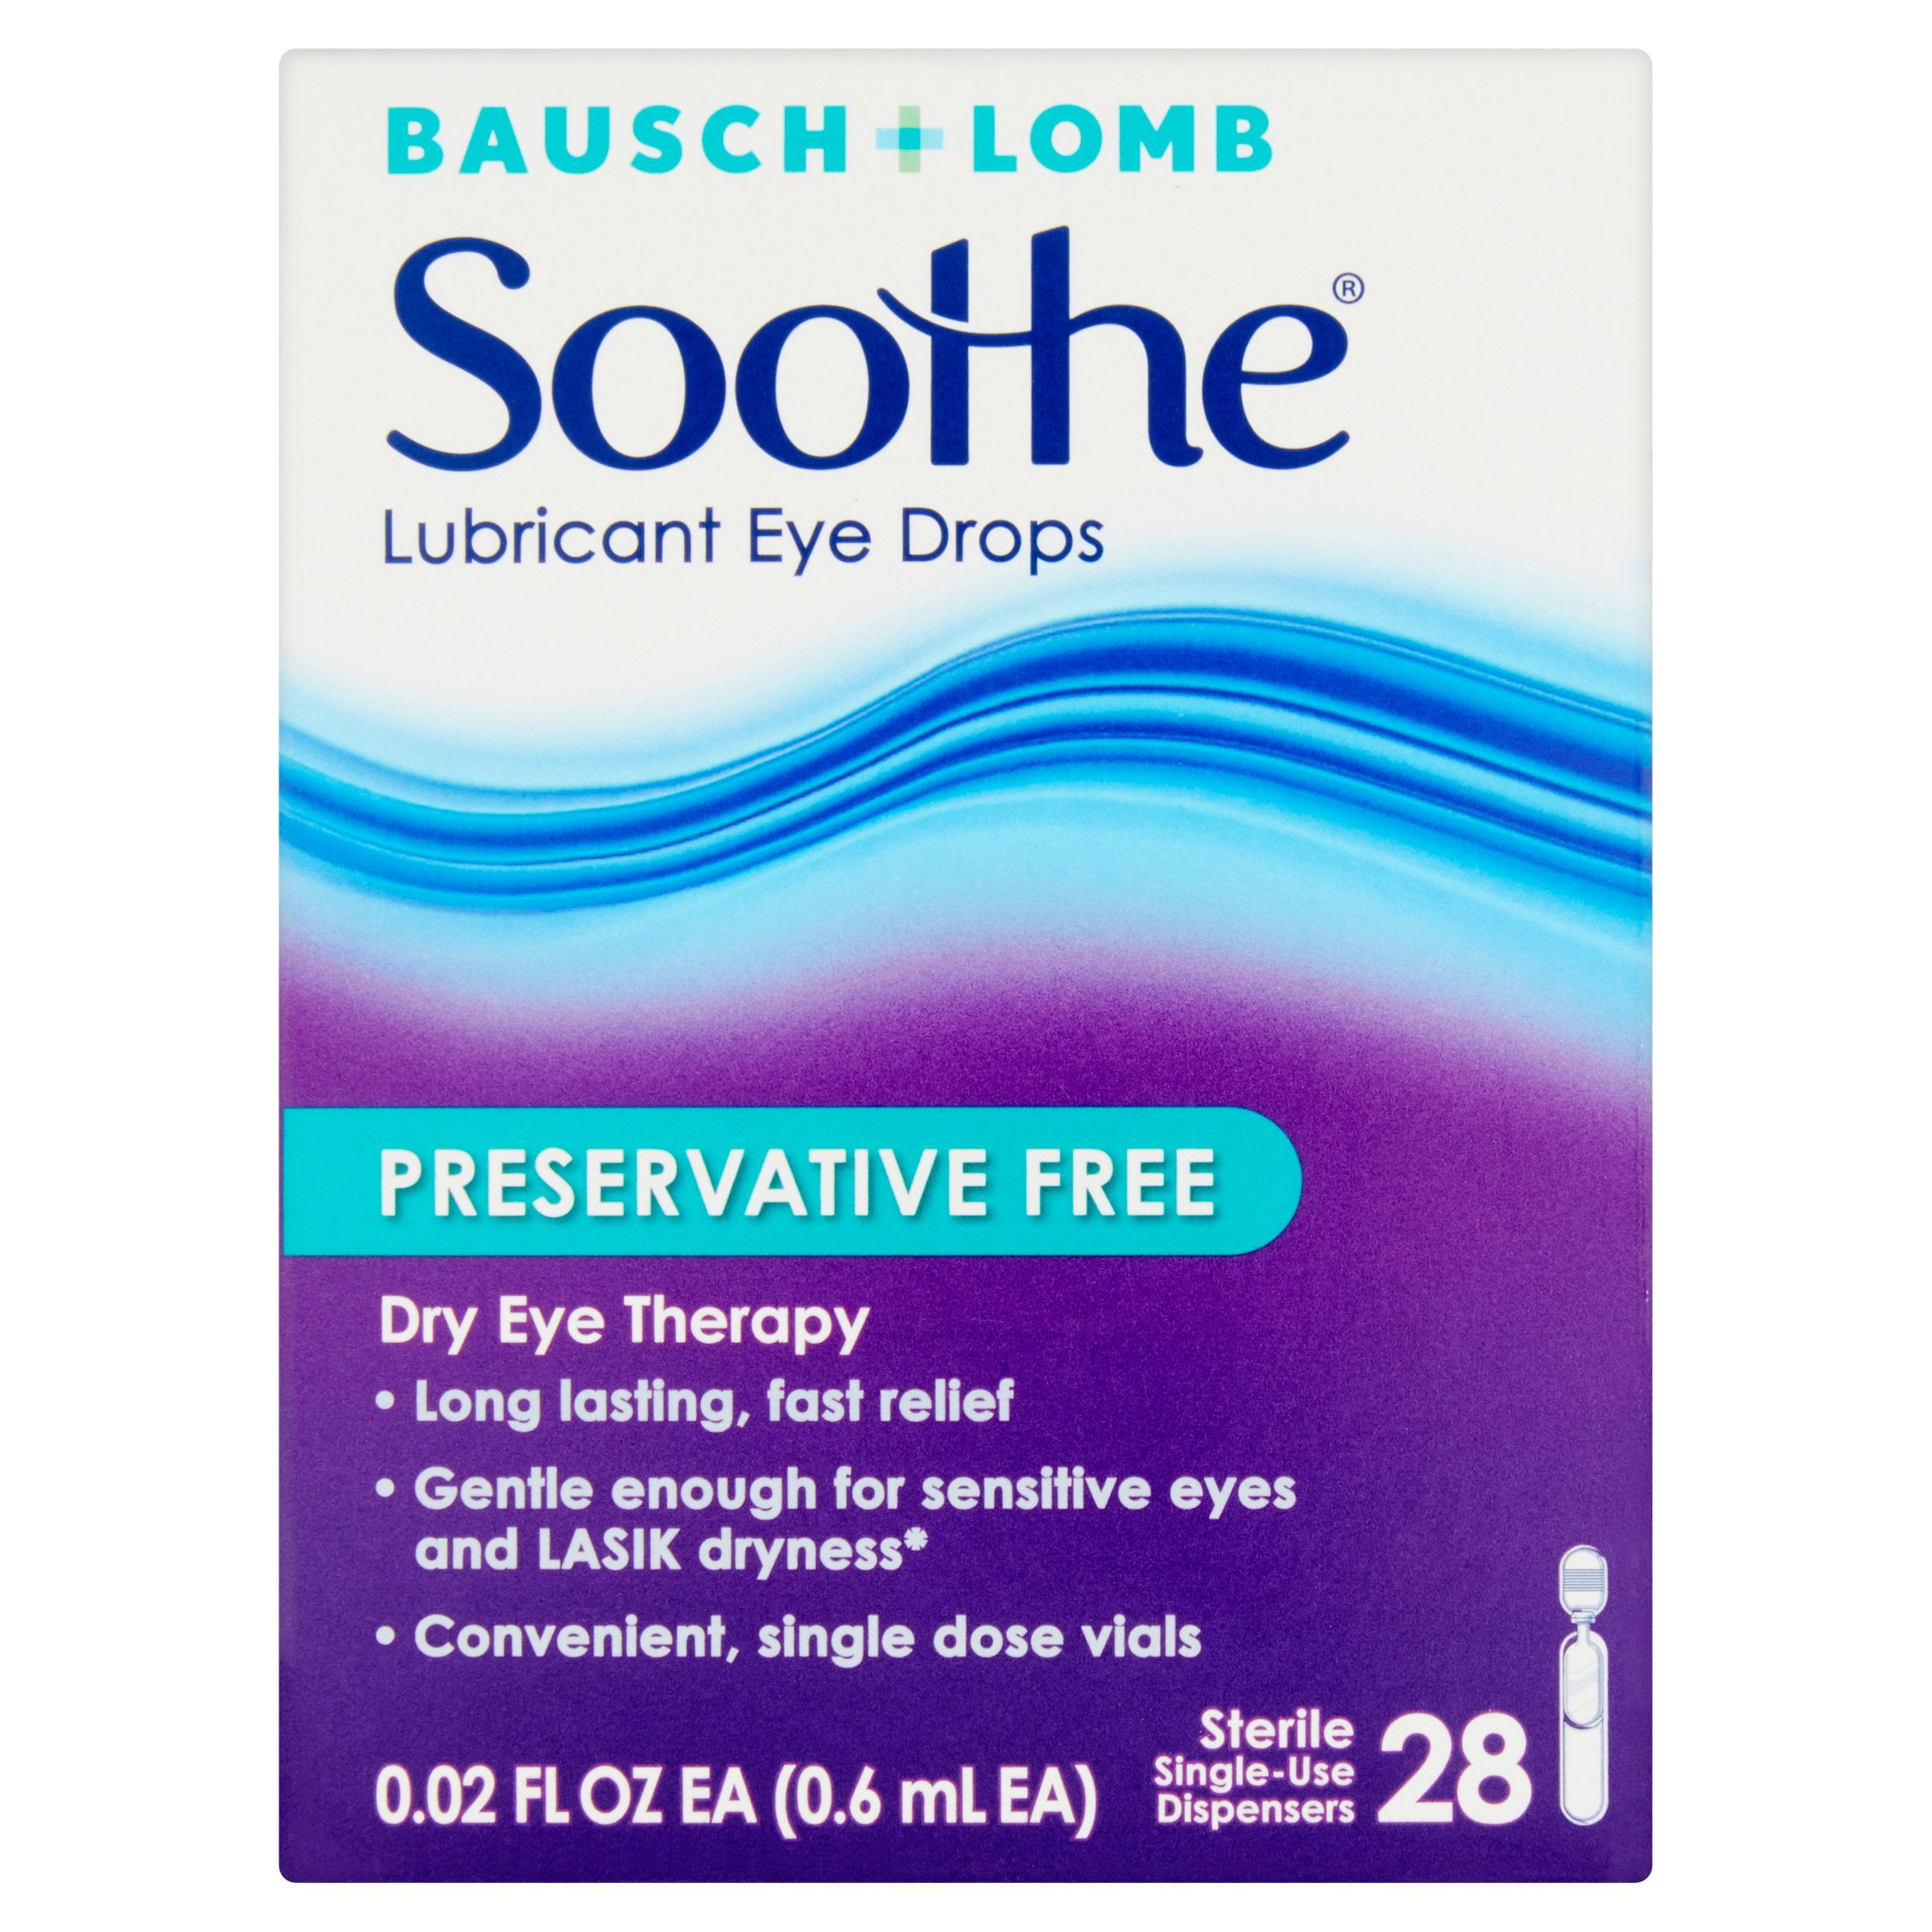 bausch-lomb-soothe-lubricant-eye-drops-28-ct-walmart